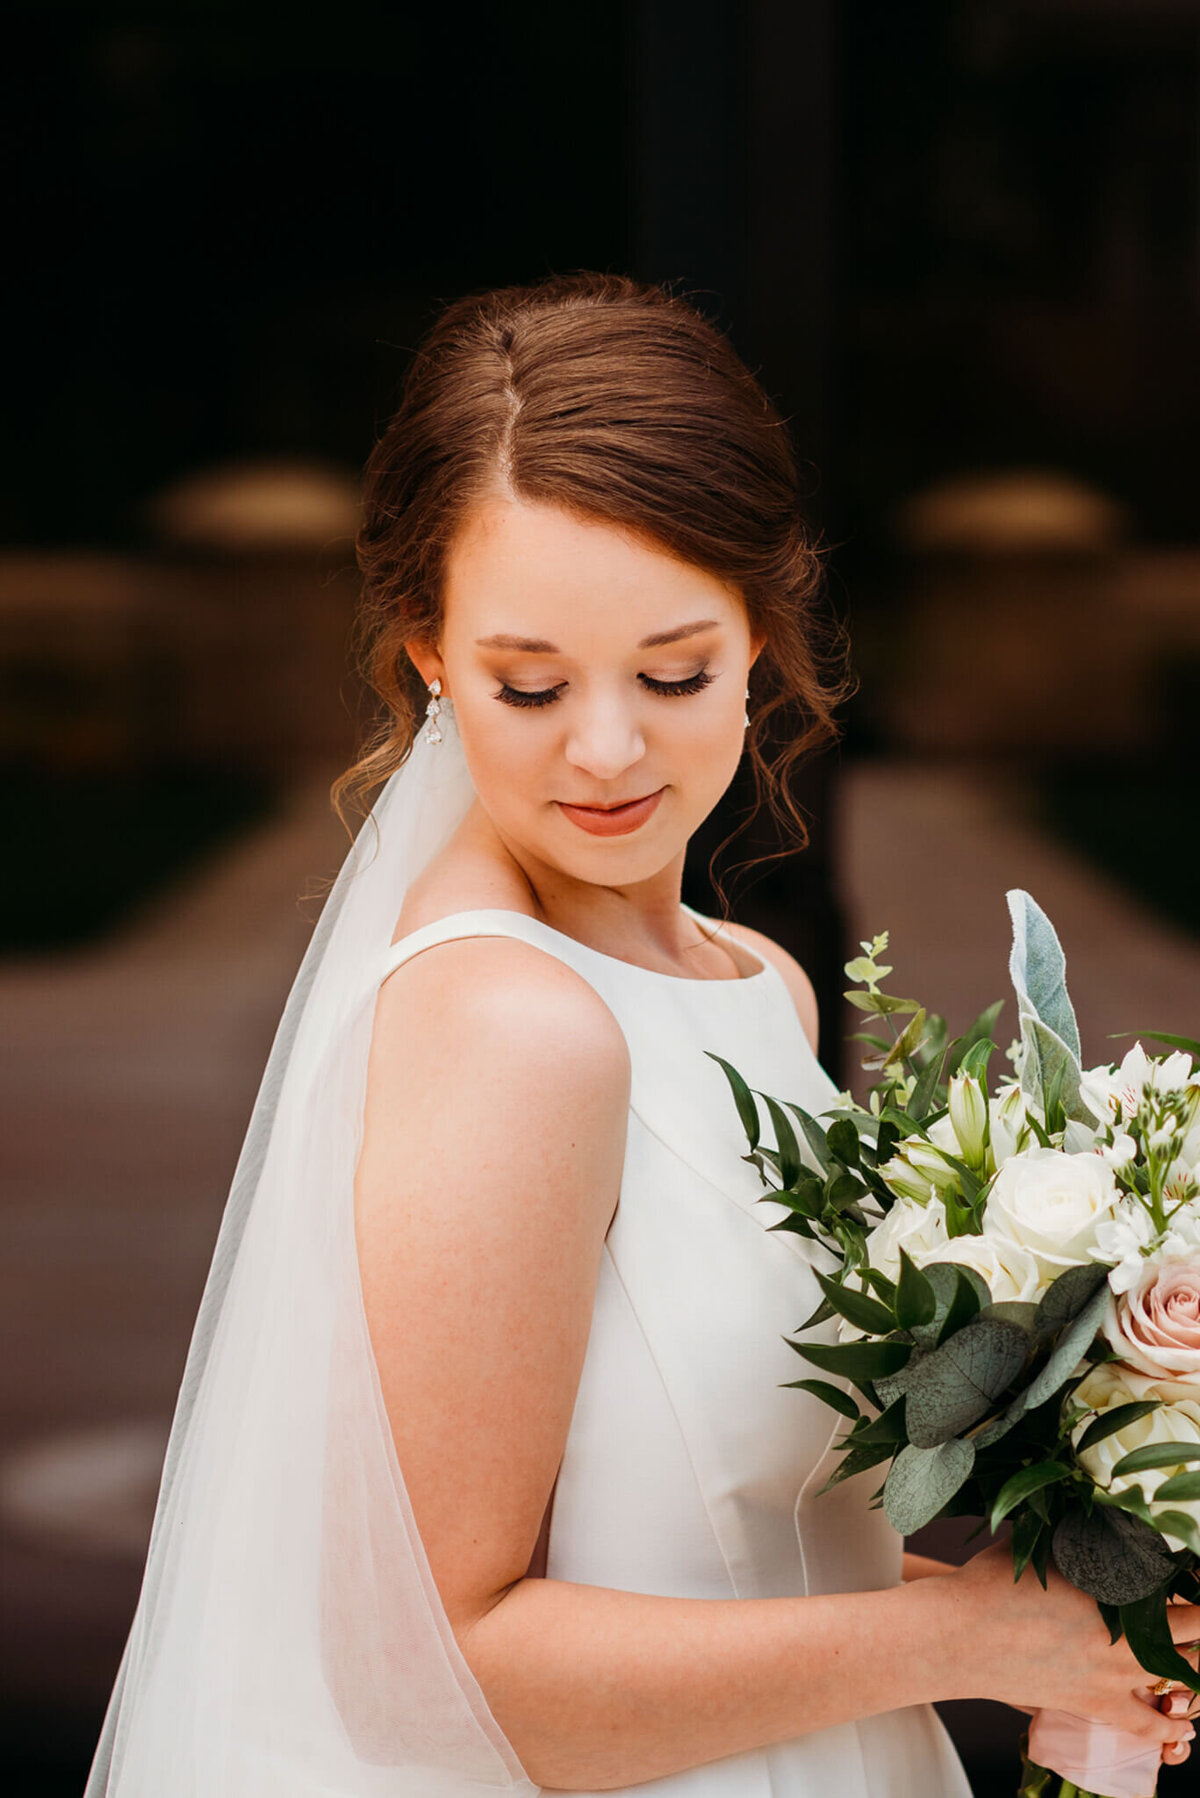 Photo of a bride holding her wedding bouquet and looking down at the ground